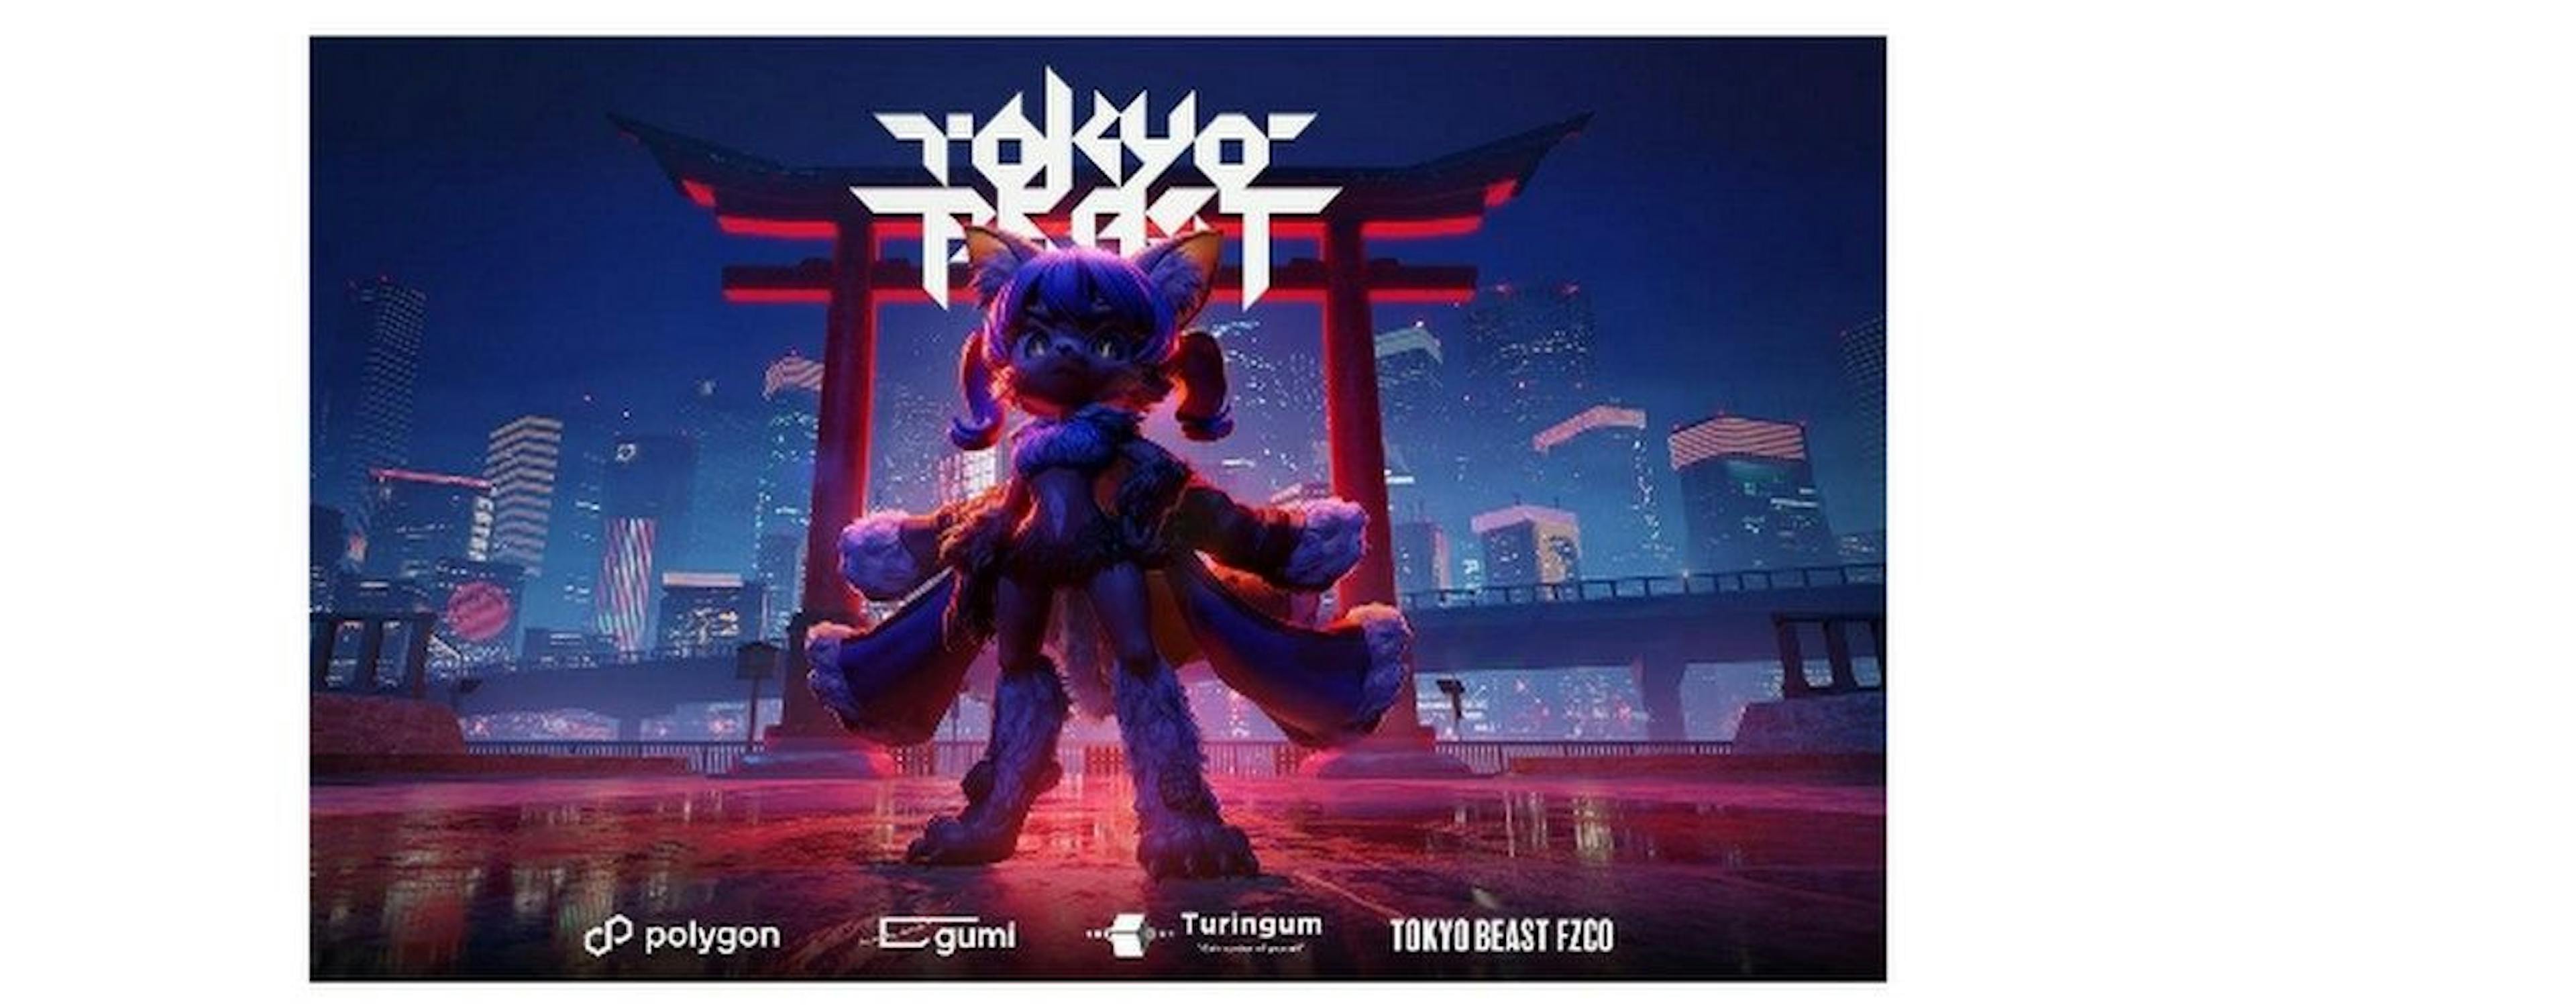 /tokyo-beast-a-crypto-entertainment-game-by-gumi-launches-on-korea-blockchain-week feature image